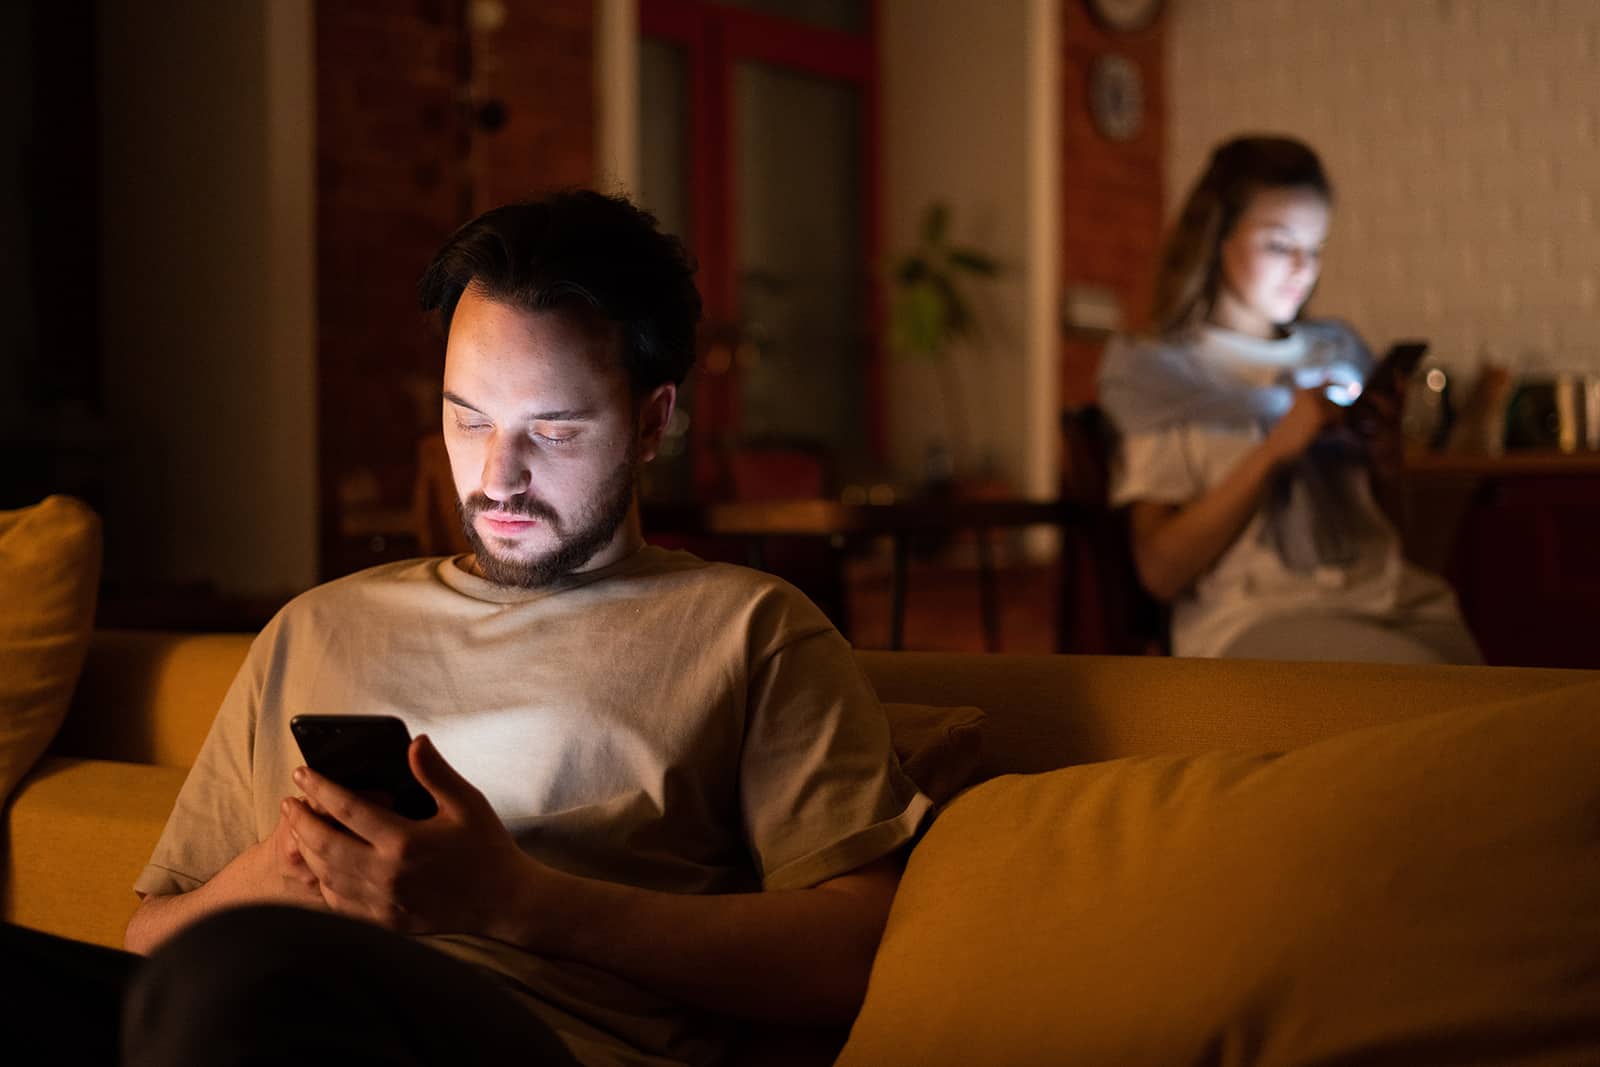 man and a woman using smartphones at home sitting separately places